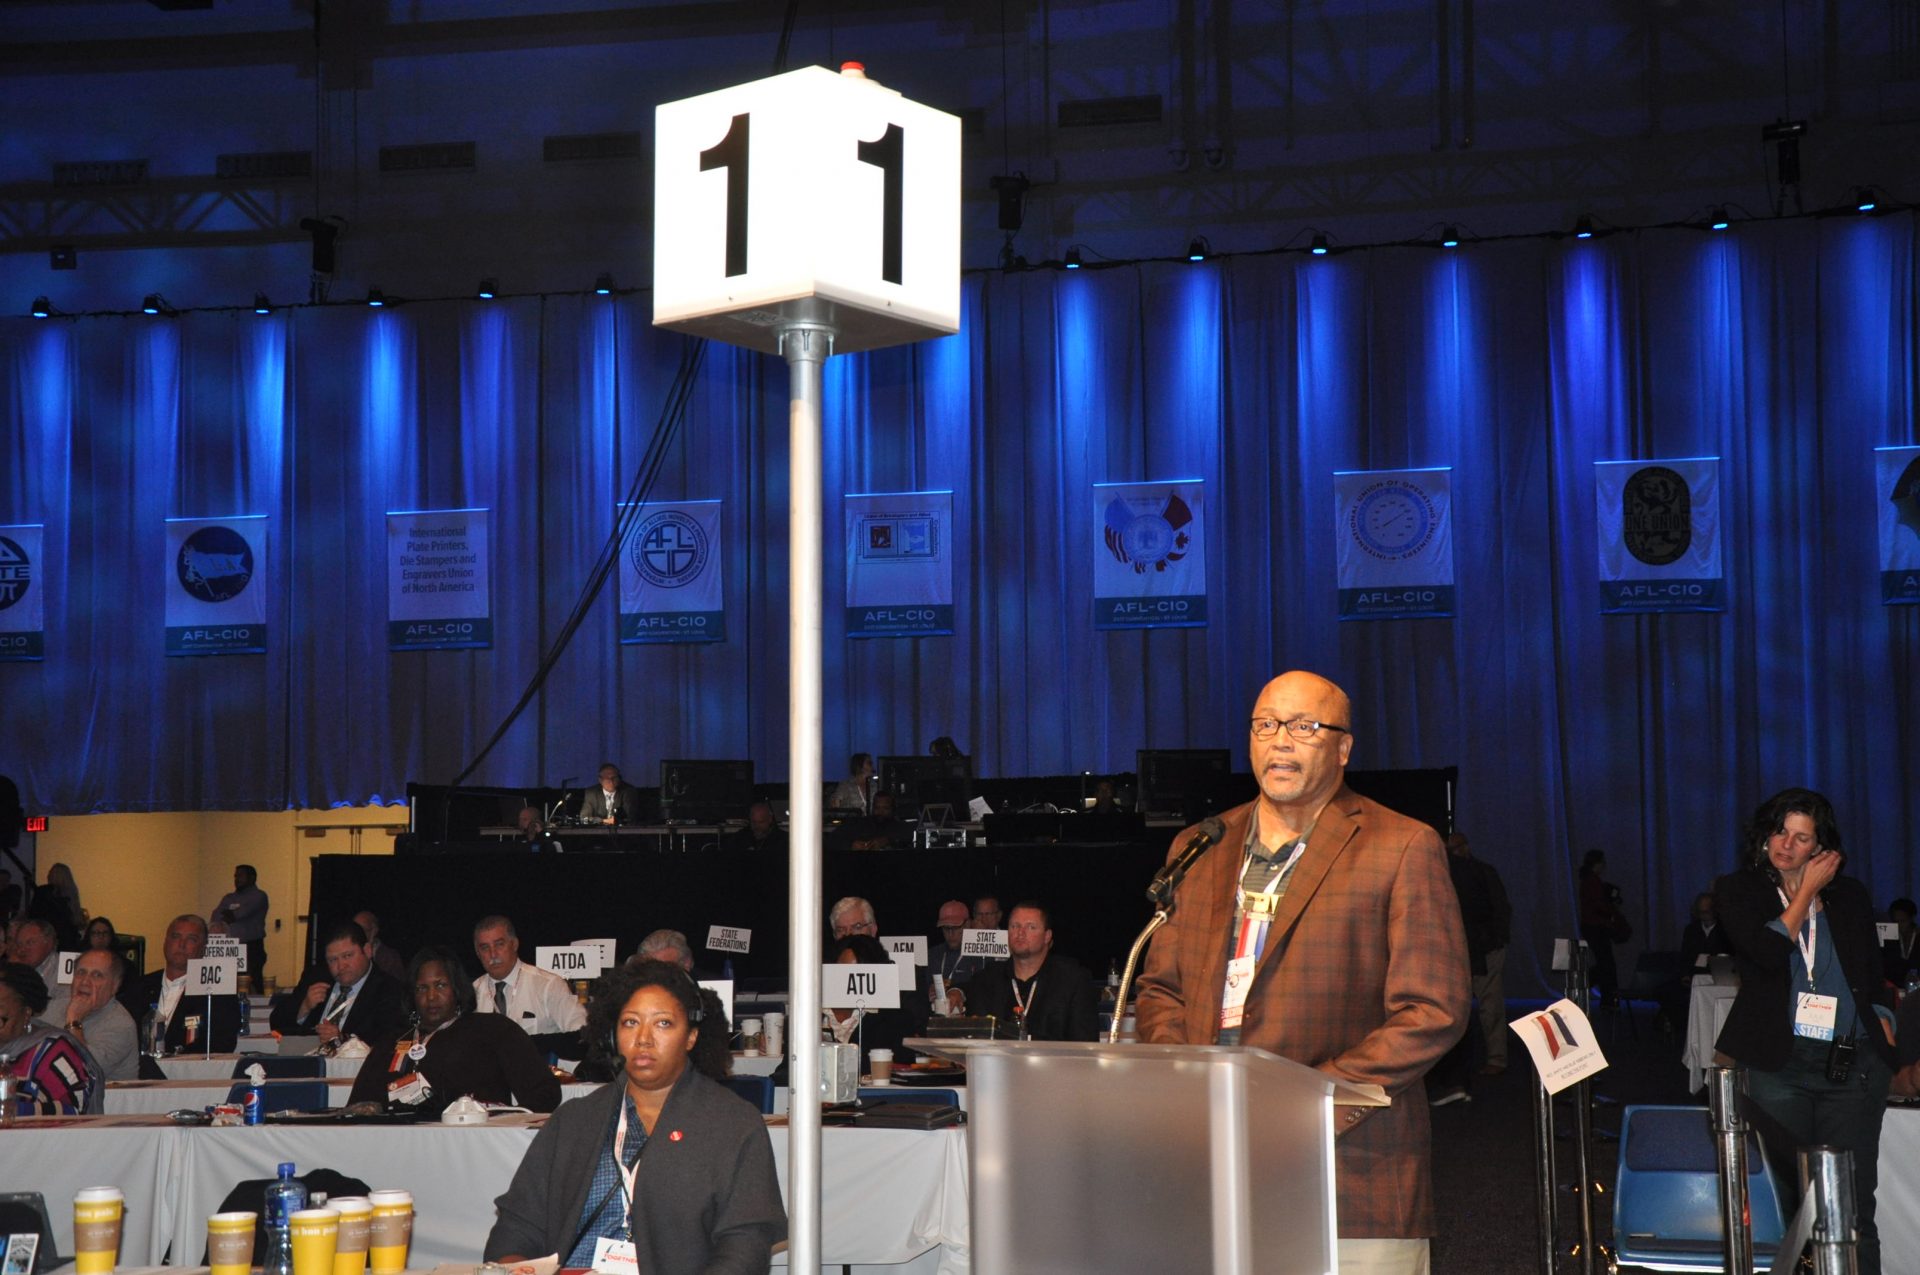 Image from the Gallery: AFL-CIO Convention – St. Louis, MO